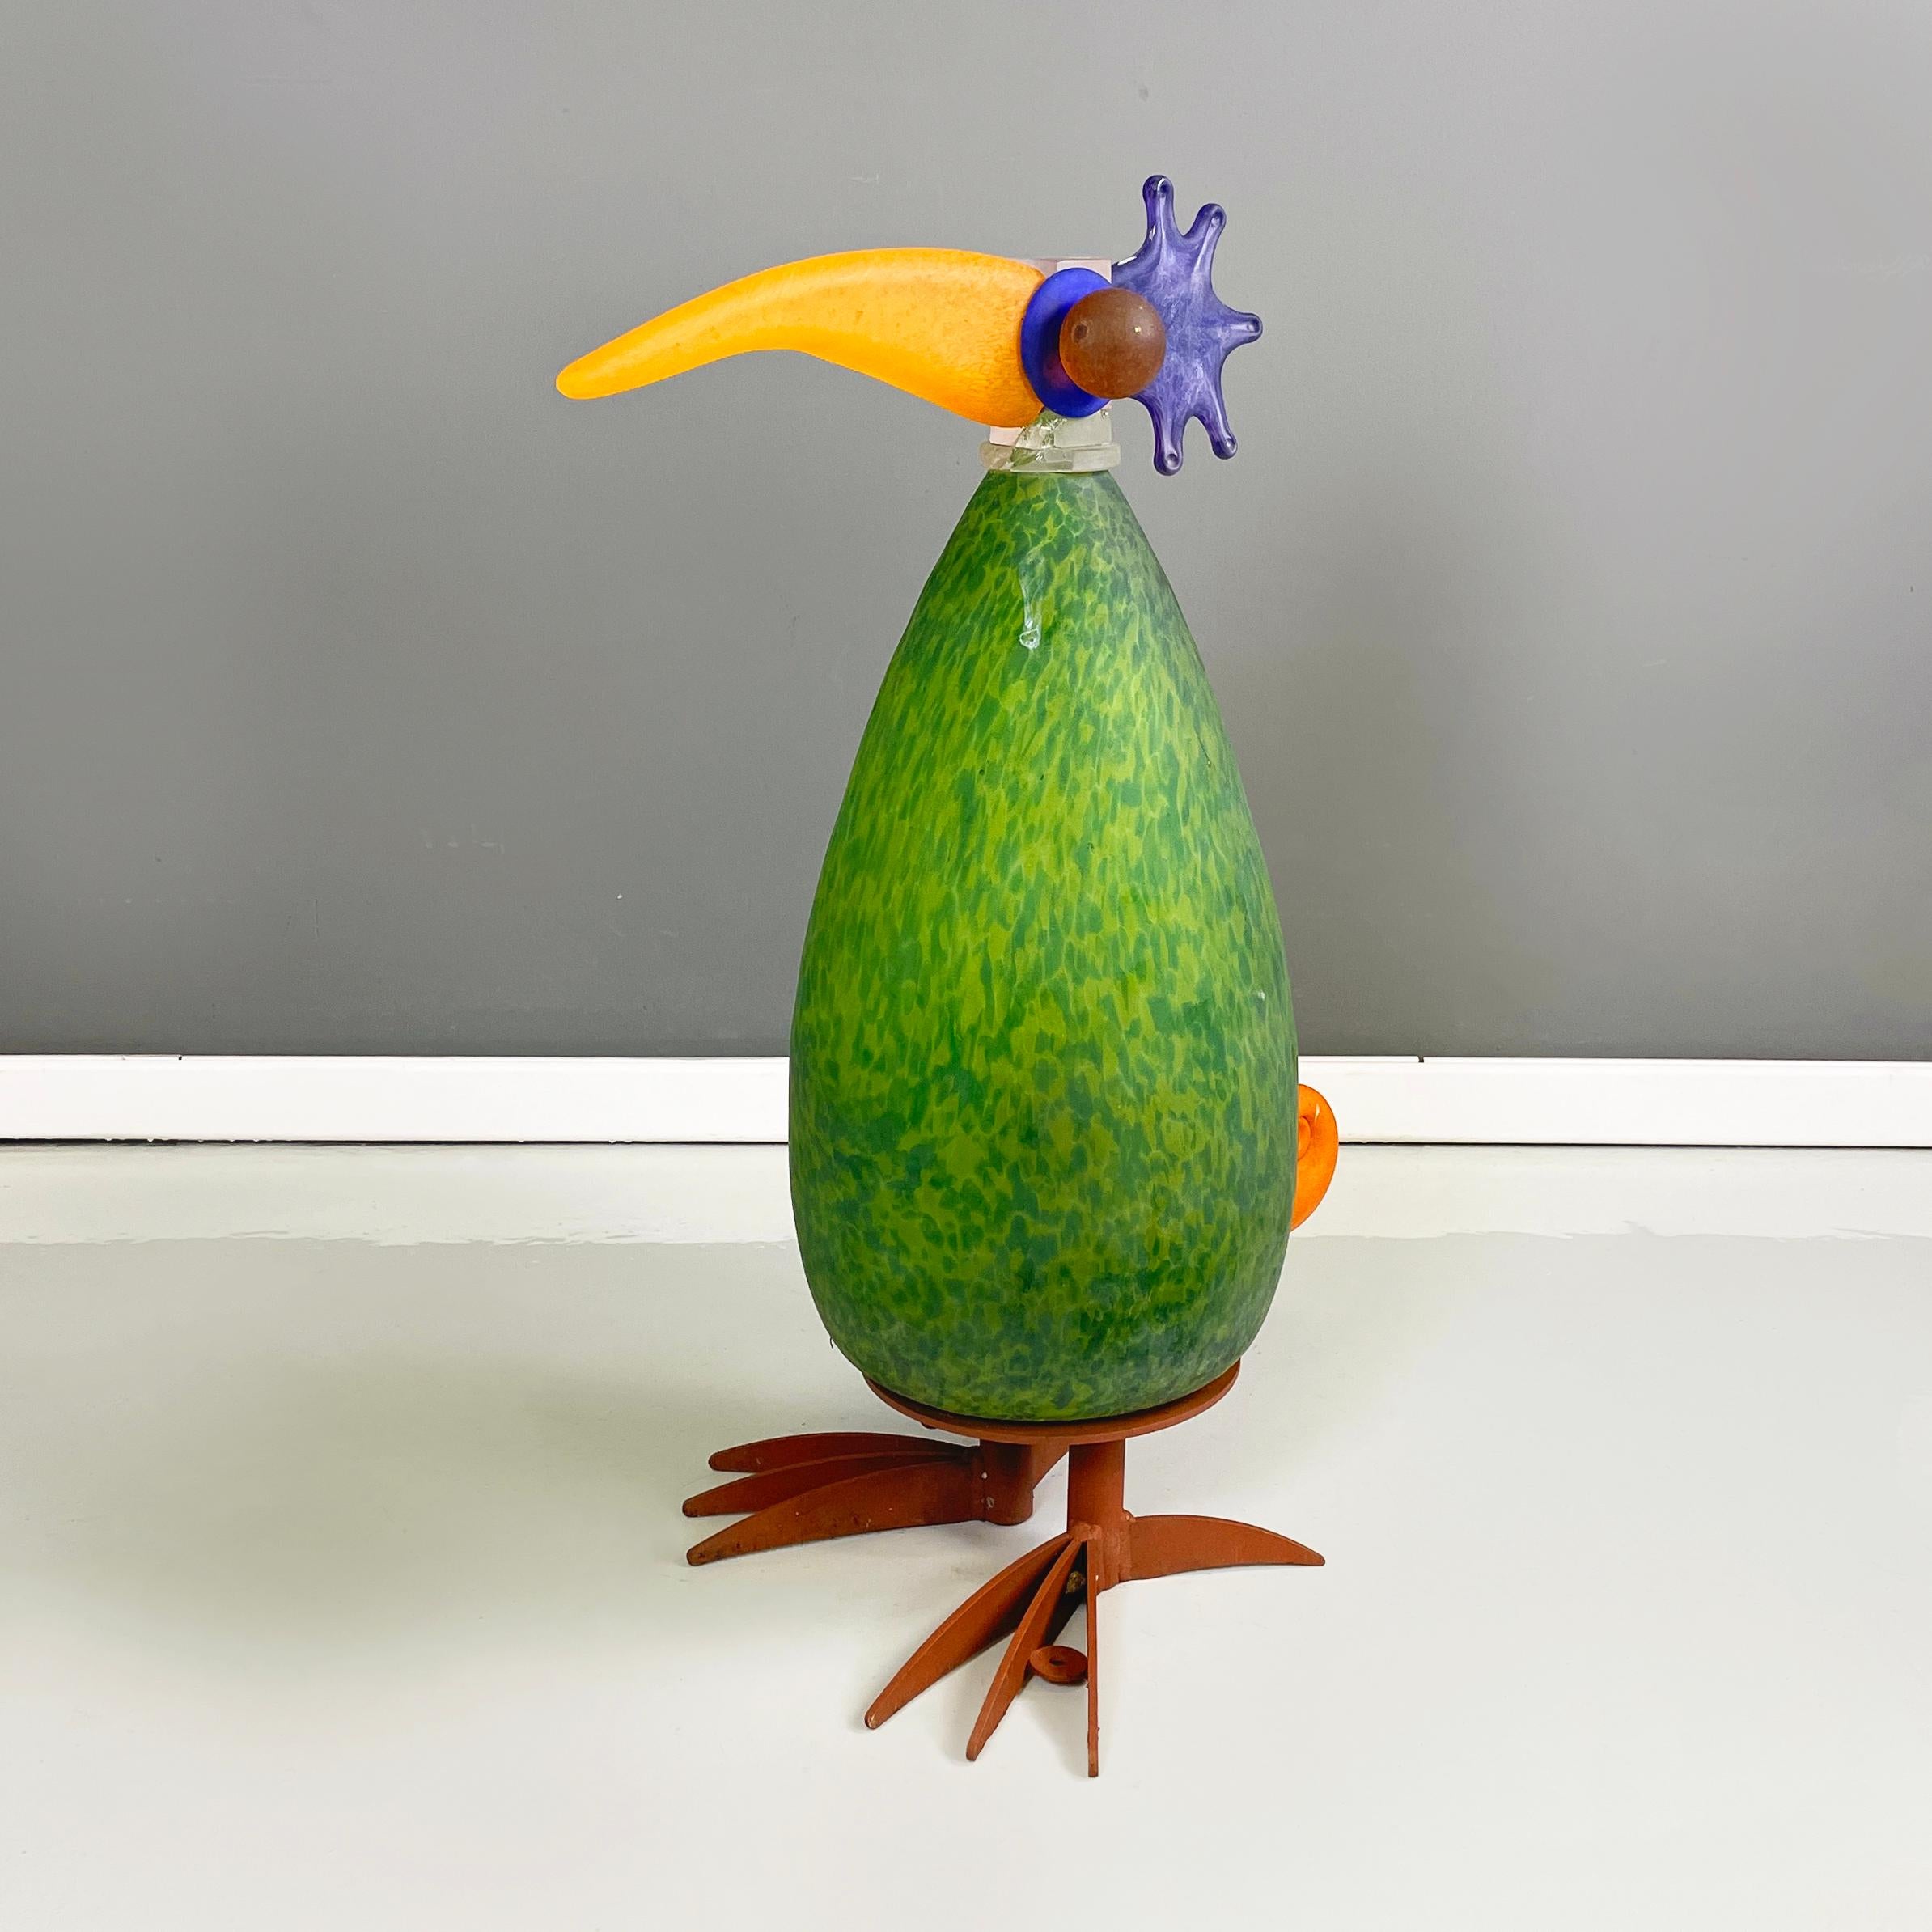 Poland modern Sculptural lamp Big Gonzo by Borowski Glass Studio, 2000s
Sculptural floor or table lamp mod. Big Gonzo in blown and handmade glass in green, blue, orange and transparent. The sculpture represents a particular bird standing with